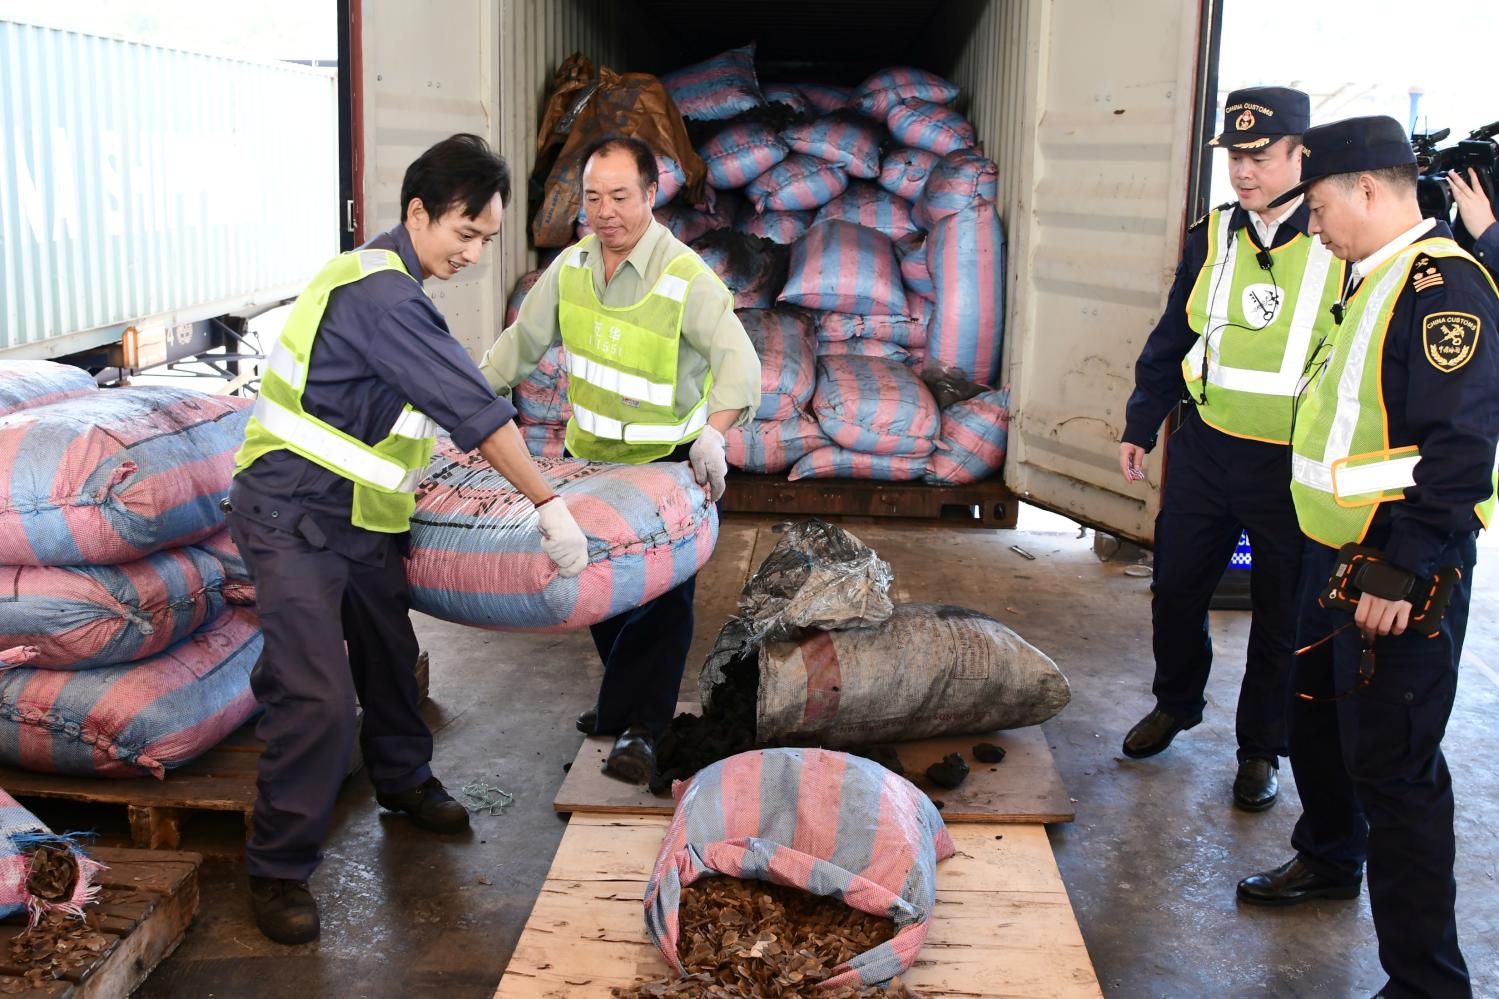 Chinese customs officials carry sacks of pangolins scales they seized on a ship in Shenzhen, Guangdong province, China November 29, 2017. Picture taken November 29, 2017. REUTERS/Stringer ATTENTION EDITORS - THIS IMAGE WAS PROVIDED BY A THIRD PARTY. CHINA OUT.